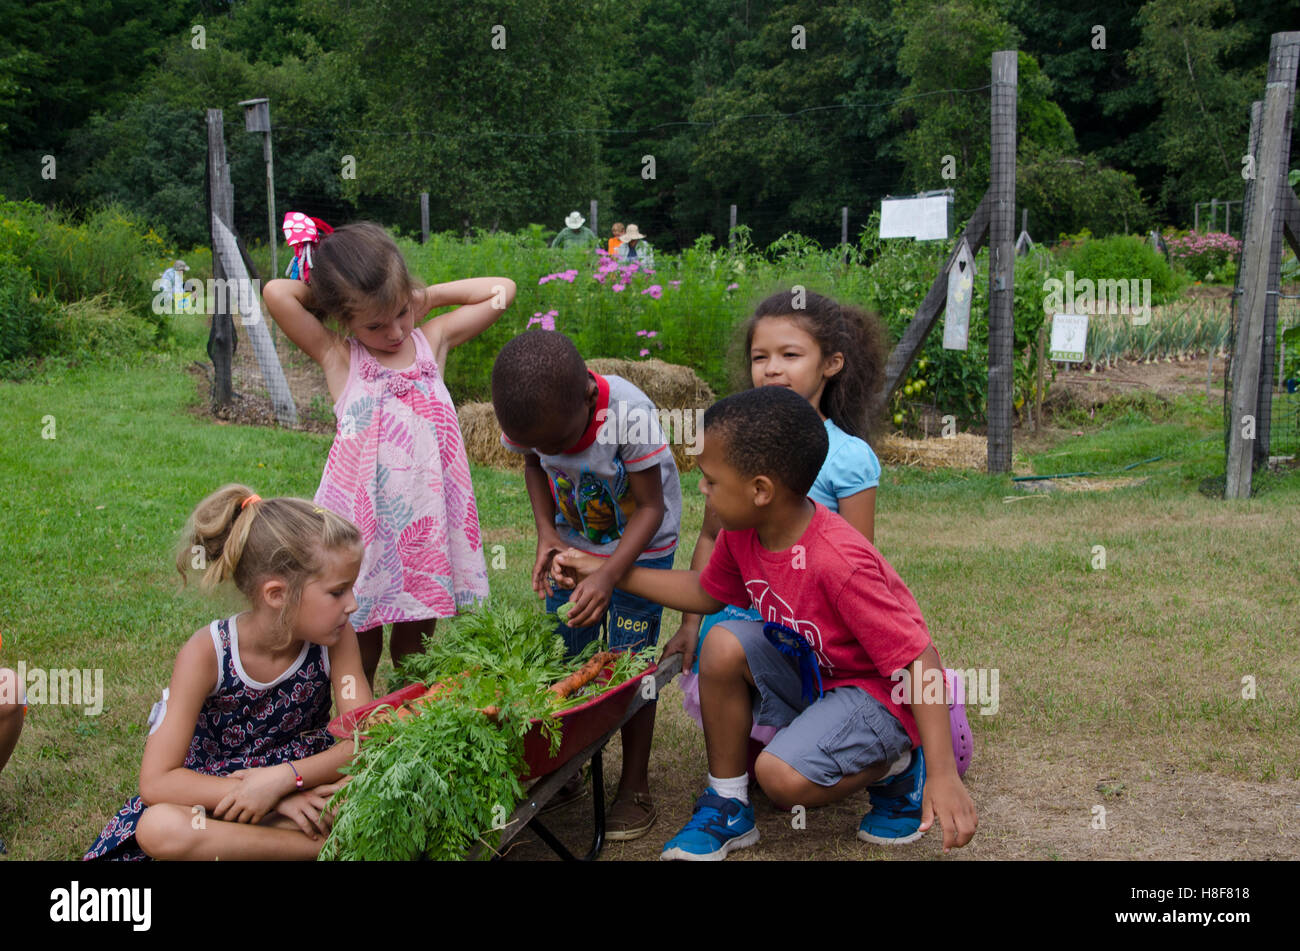 Children playing and learning at community garden camp with a small wheelbarrow, Yarmouth Maine, USA Stock Photo